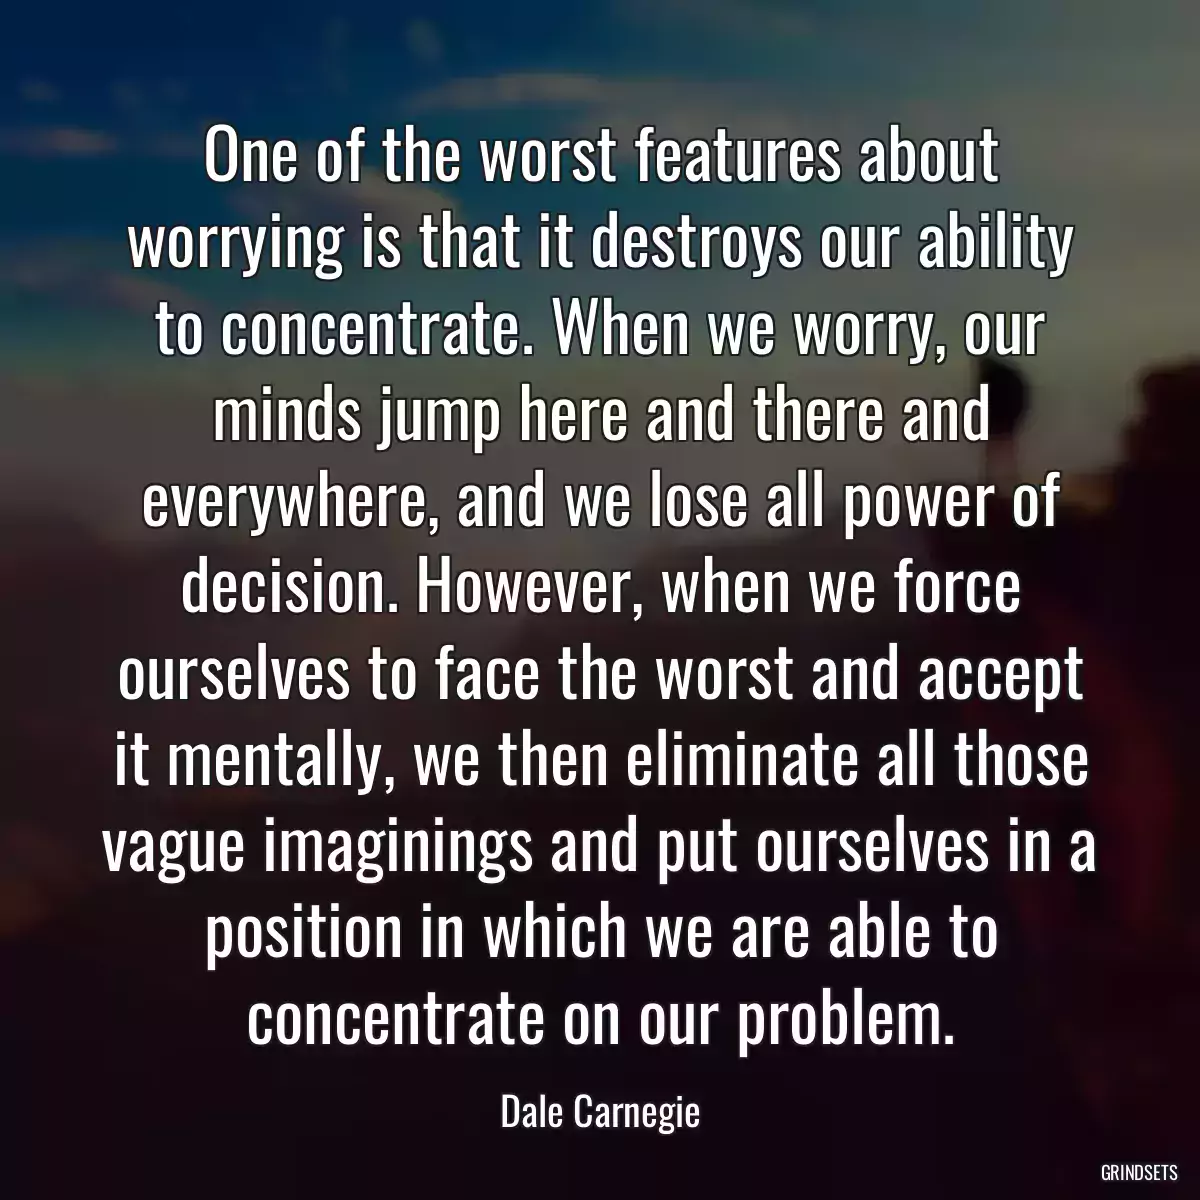 One of the worst features about worrying is that it destroys our ability to concentrate. When we worry, our minds jump here and there and everywhere, and we lose all power of decision. However, when we force ourselves to face the worst and accept it mentally, we then eliminate all those vague imaginings and put ourselves in a position in which we are able to concentrate on our problem.